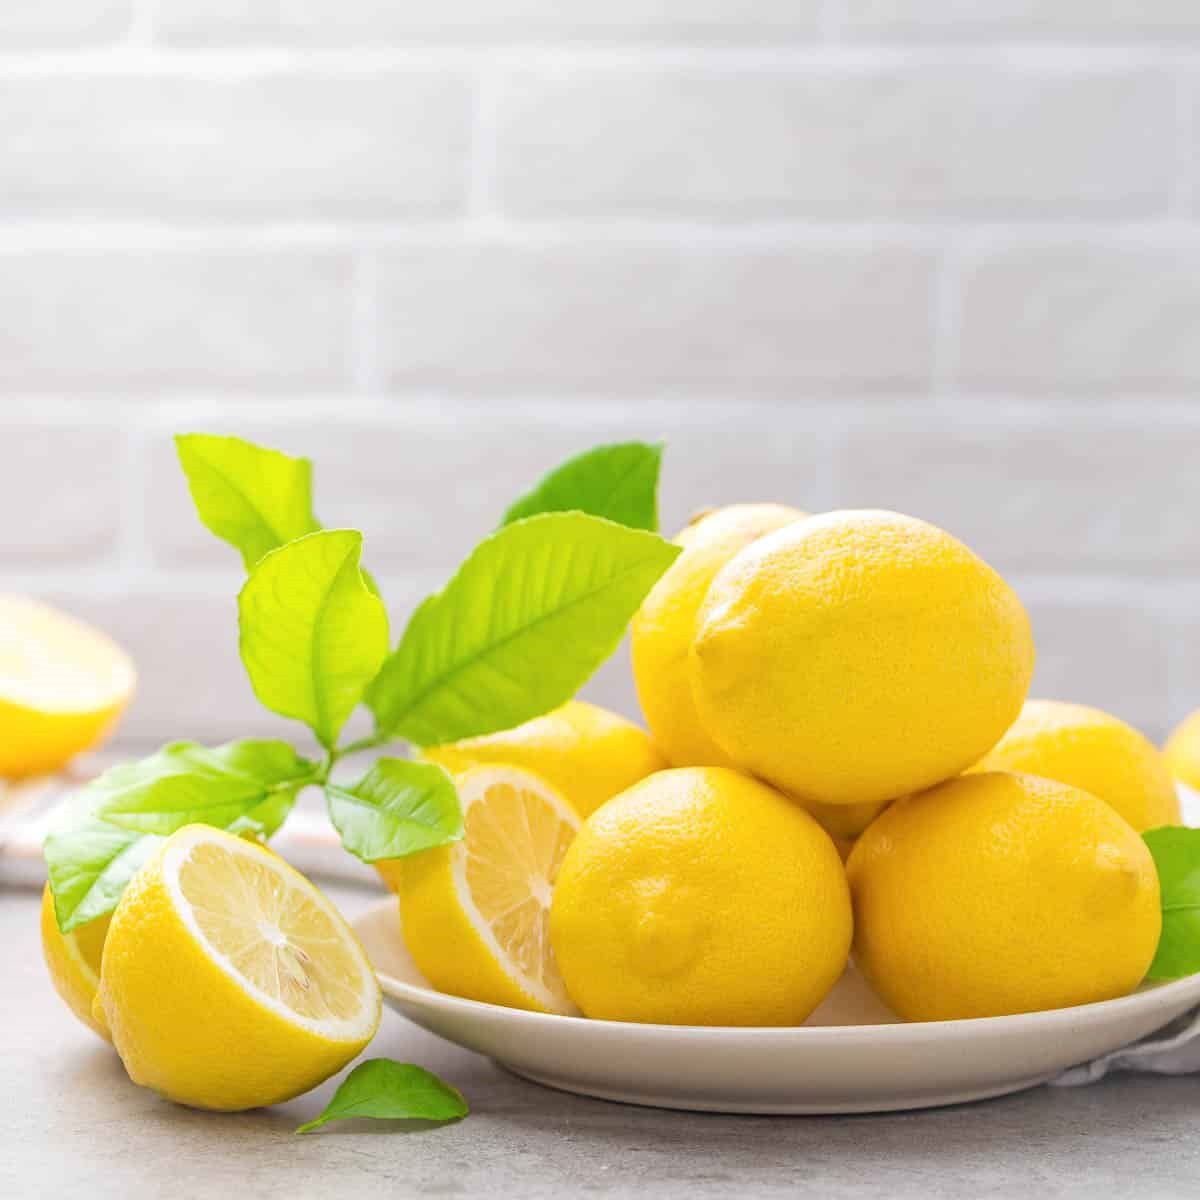 How To Store A Lemon